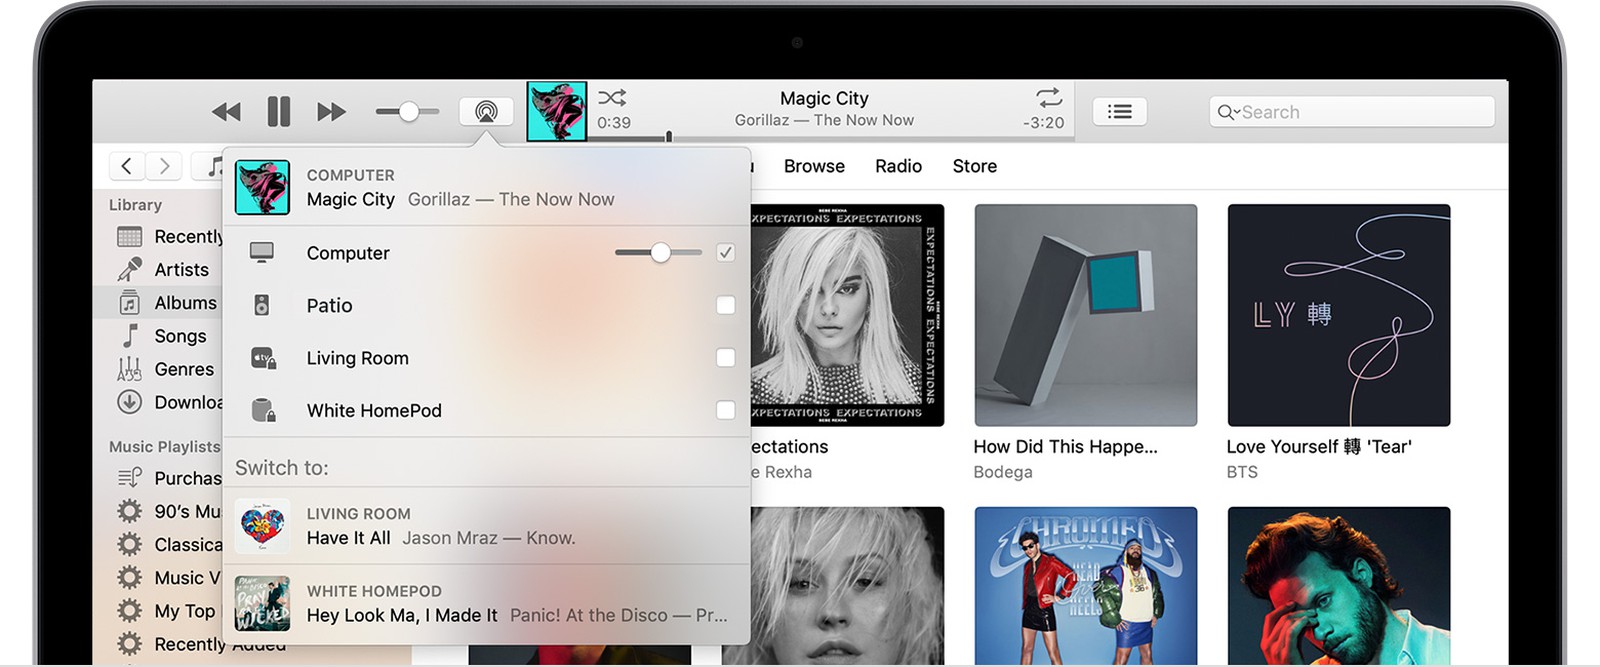 how to airplay from mac to curve tv